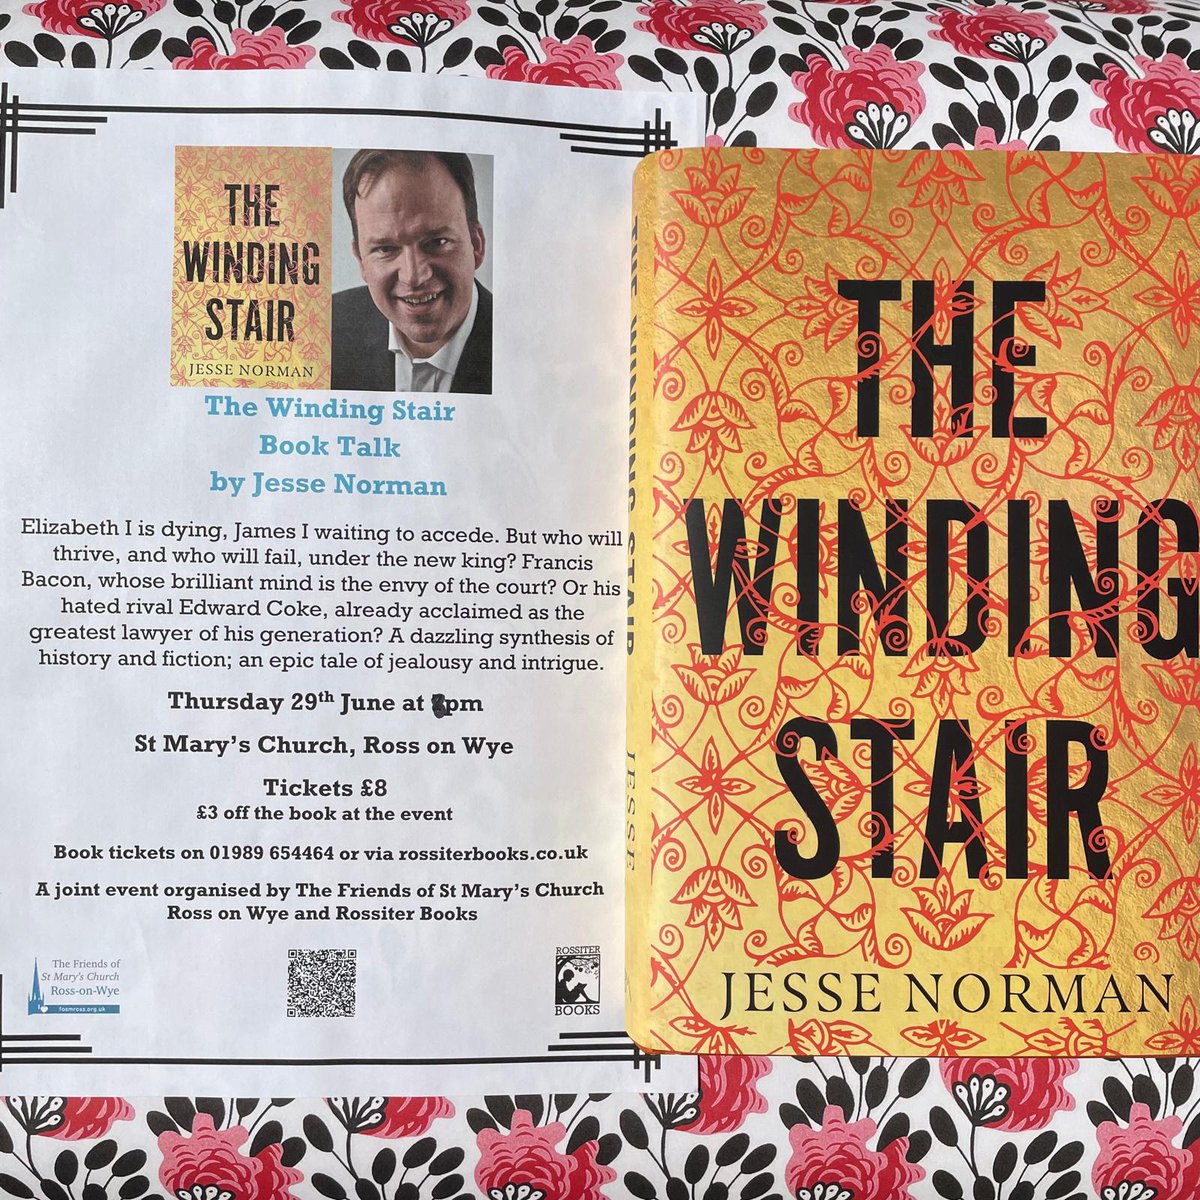 Our next book event:
@Jesse_Norman 
Thursday 29th June at 8pm
St Mary's #RossonWye

#TheWindingStair
@BitebackPub

ticketsource.co.uk/rossiterbooks/…